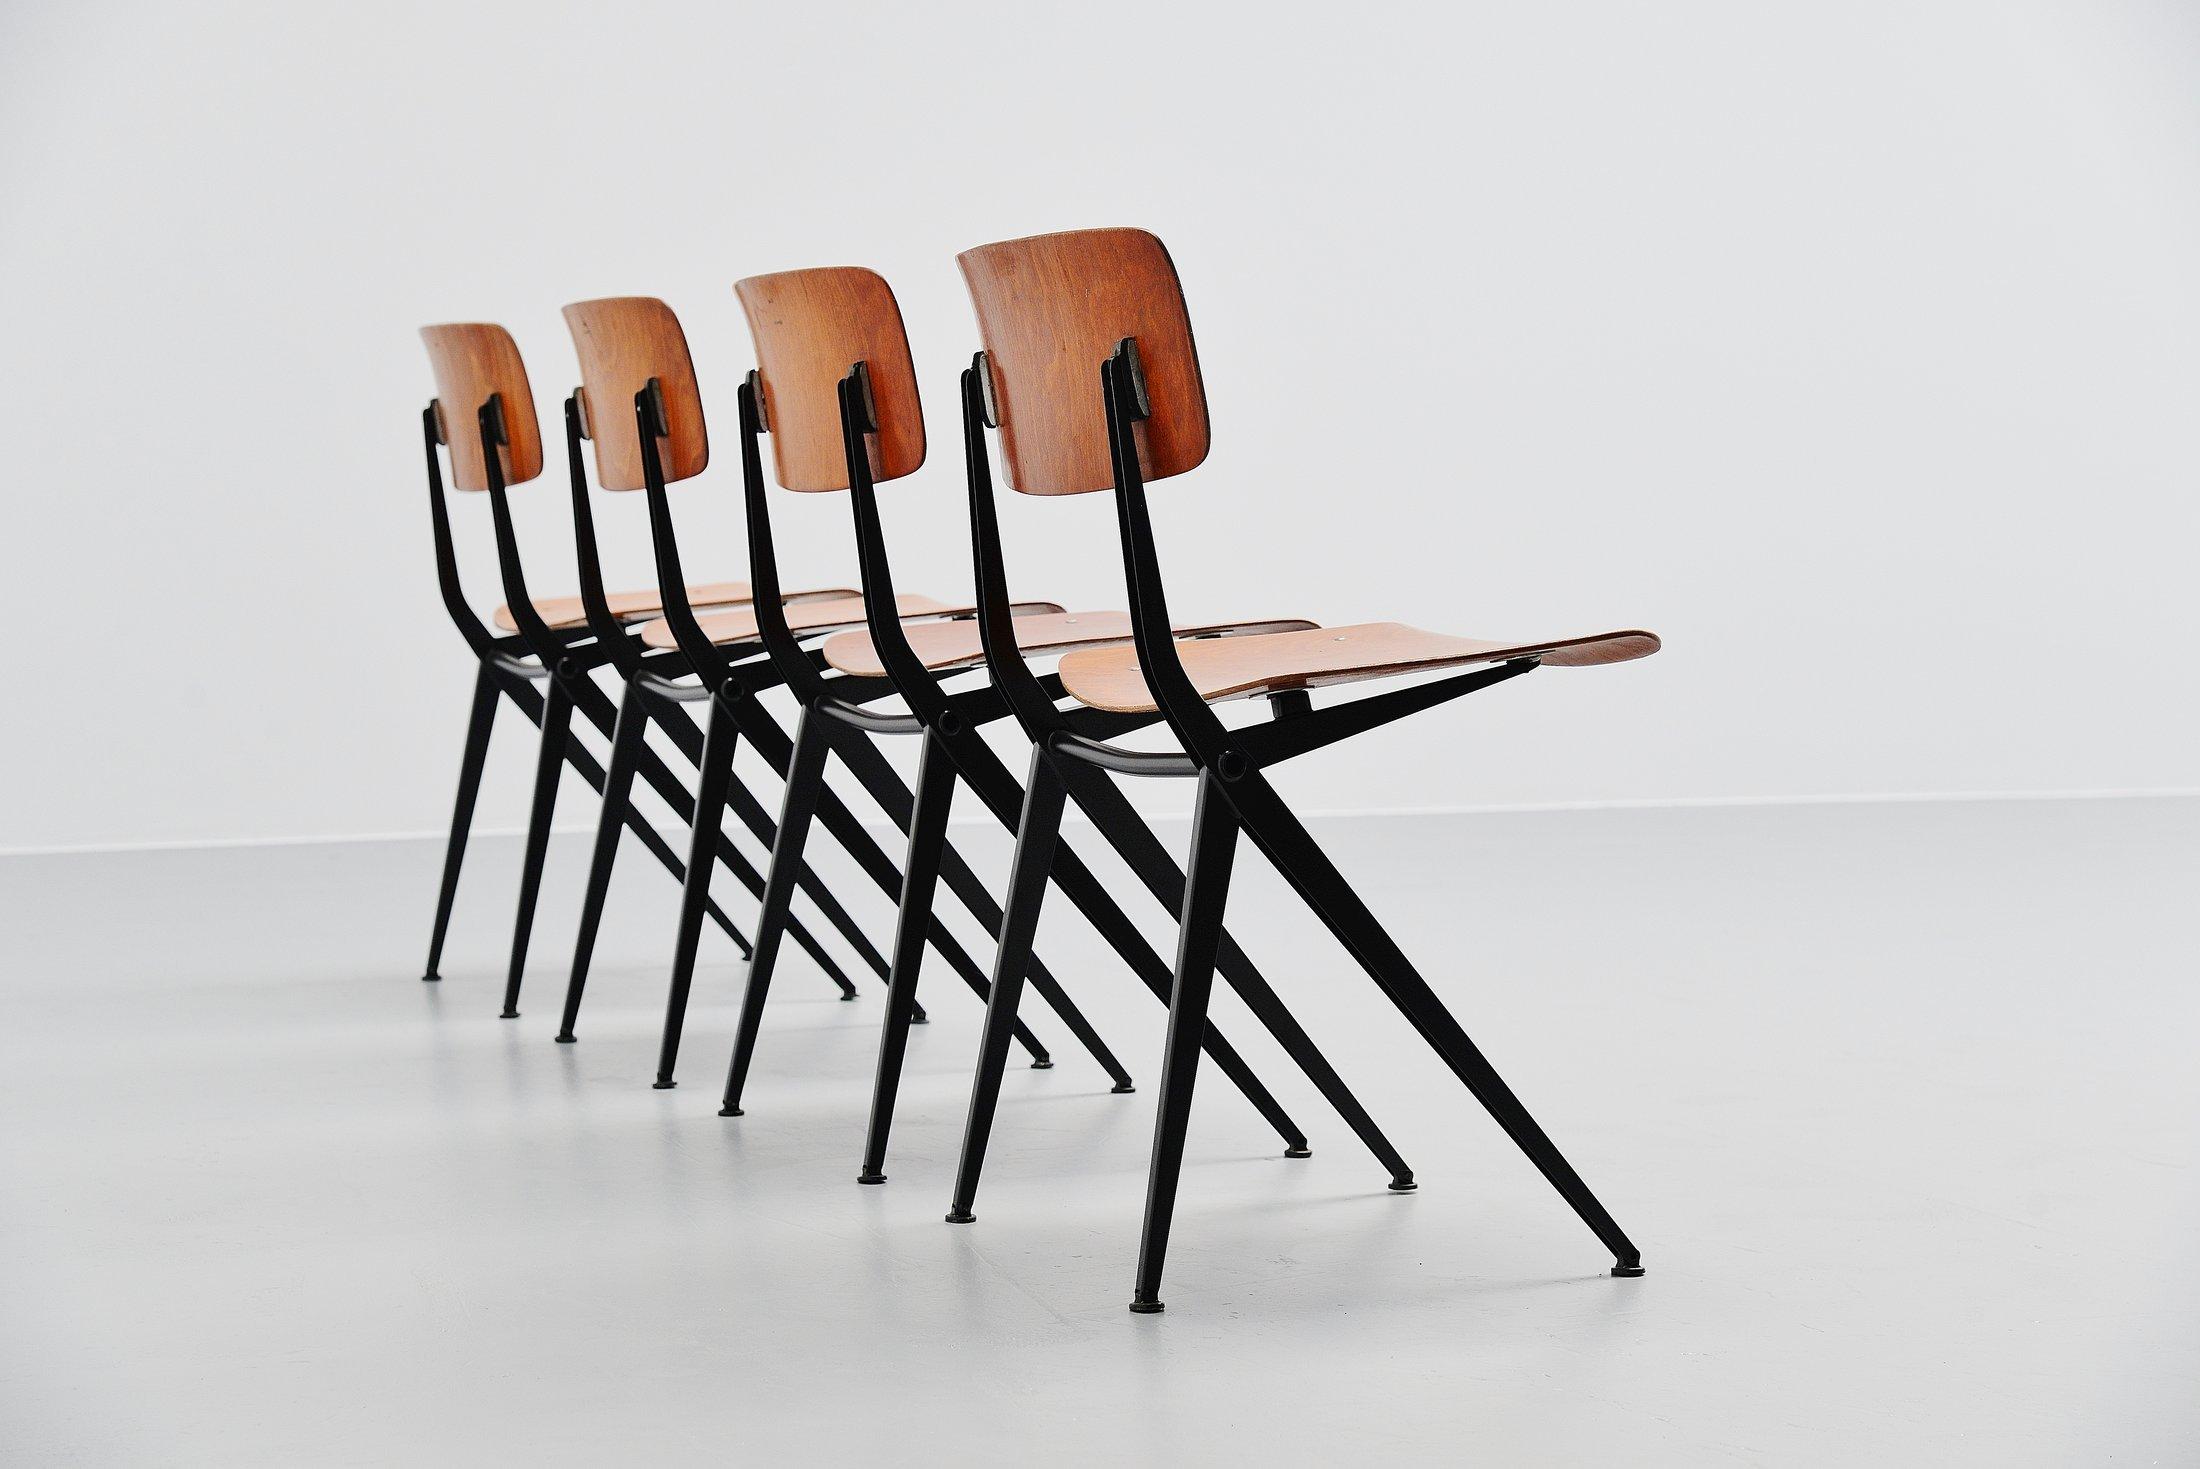 Very nice compass shaped industrial chairs designed by Ynske Kooistra and manufactured by Marko Holland 1970. Close to the designs by Friso Kramer and the quality is also very close. Nicely shaped chairs with black U-structural frame and pagwood